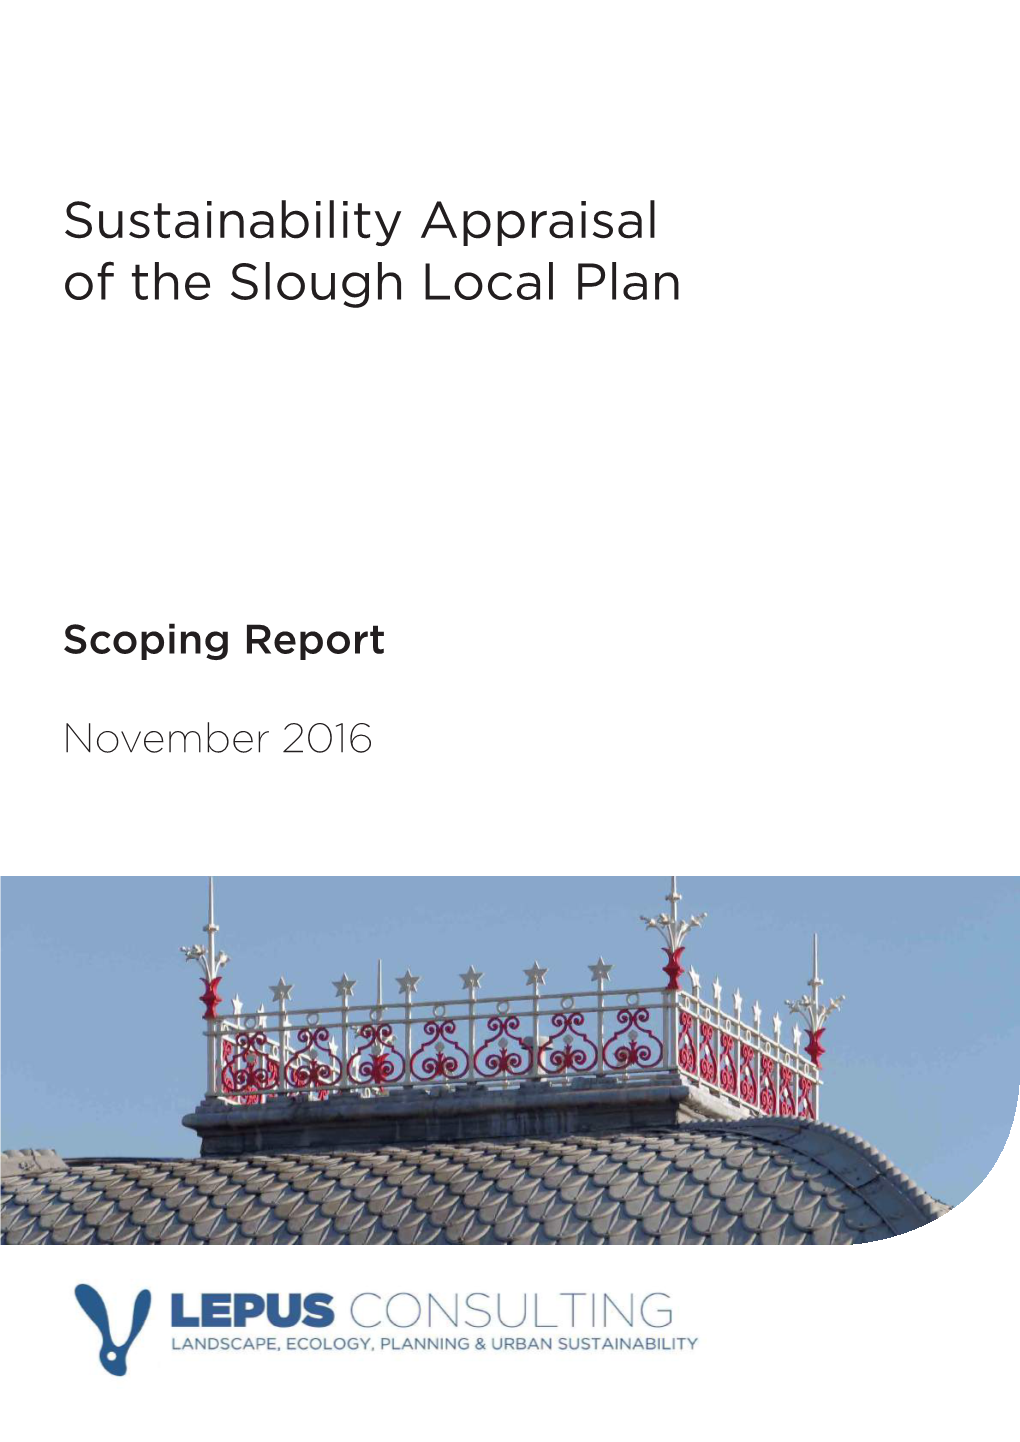 Sustainability Appraisal of the Slough Local Plan